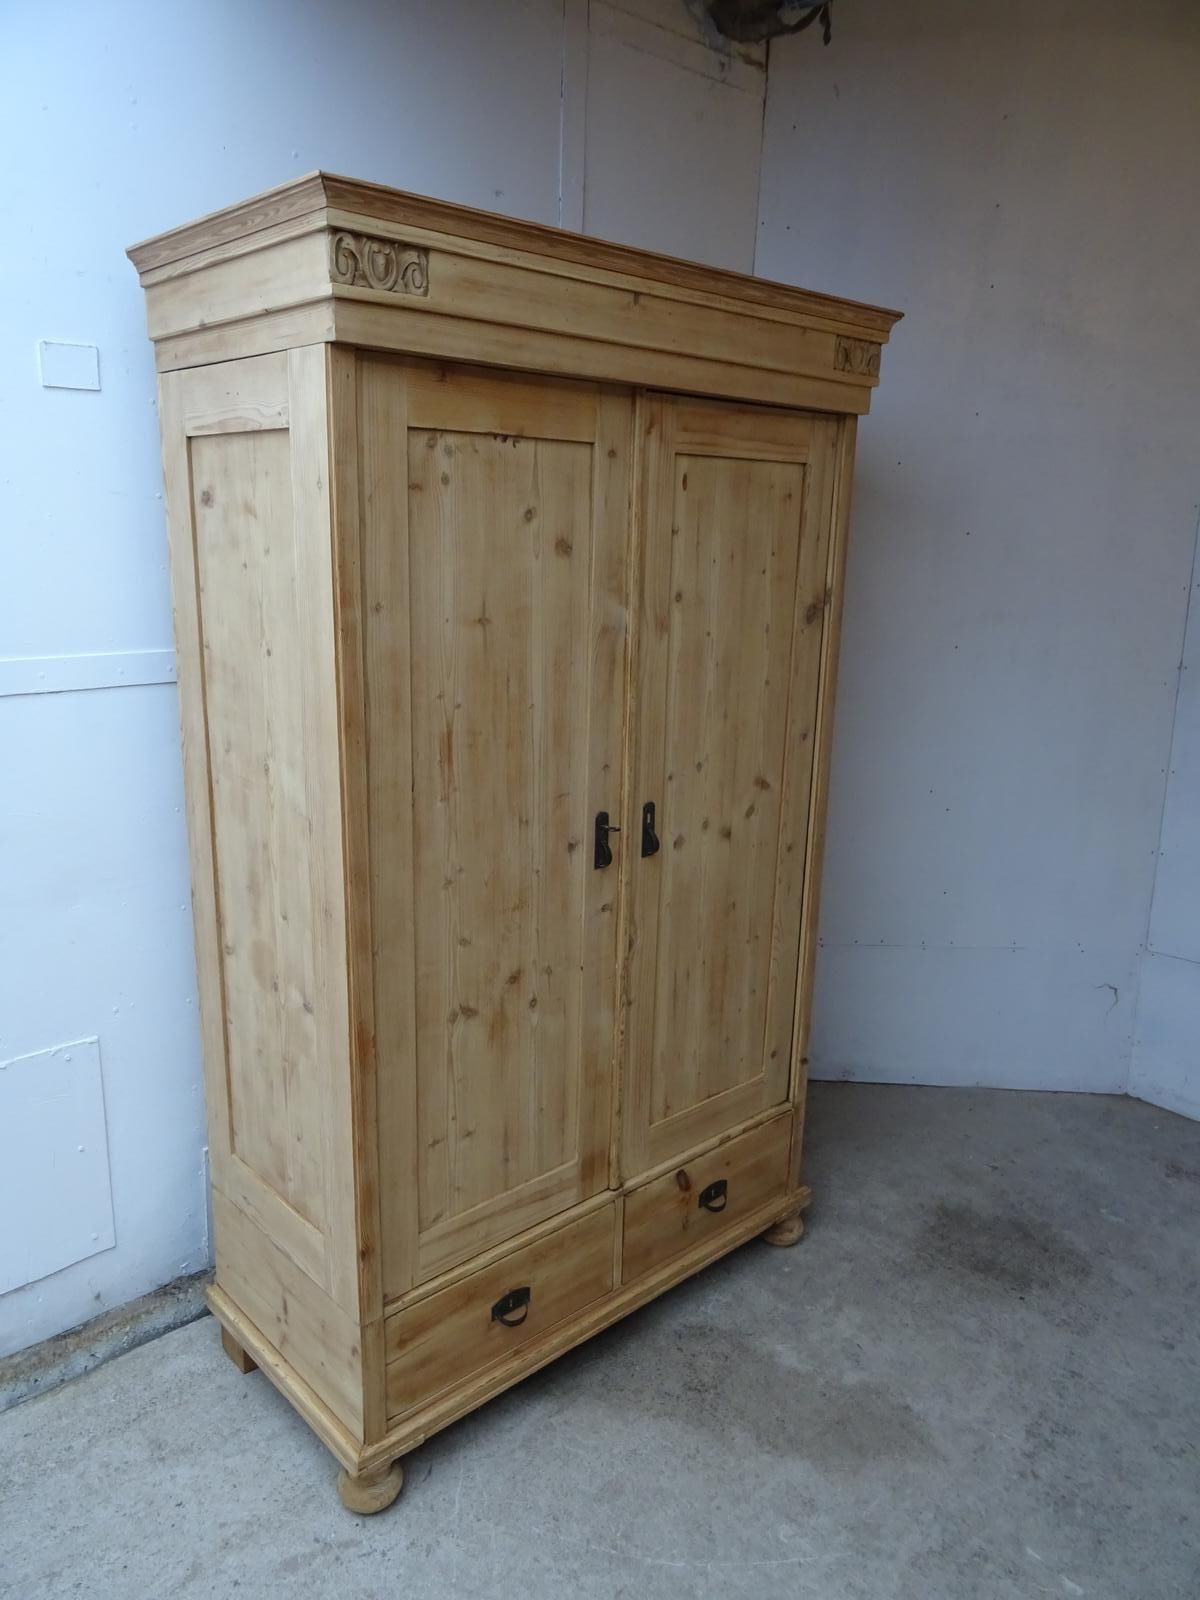 Lovely Victorian Antique Pine 2 Door Knockdown Wardrobe To Wax / Paint |  Antique Furniture For Sale, Linen Cupboard, Antique Pine Dresser Intended For Victorian Pine Wardrobes (View 15 of 20)